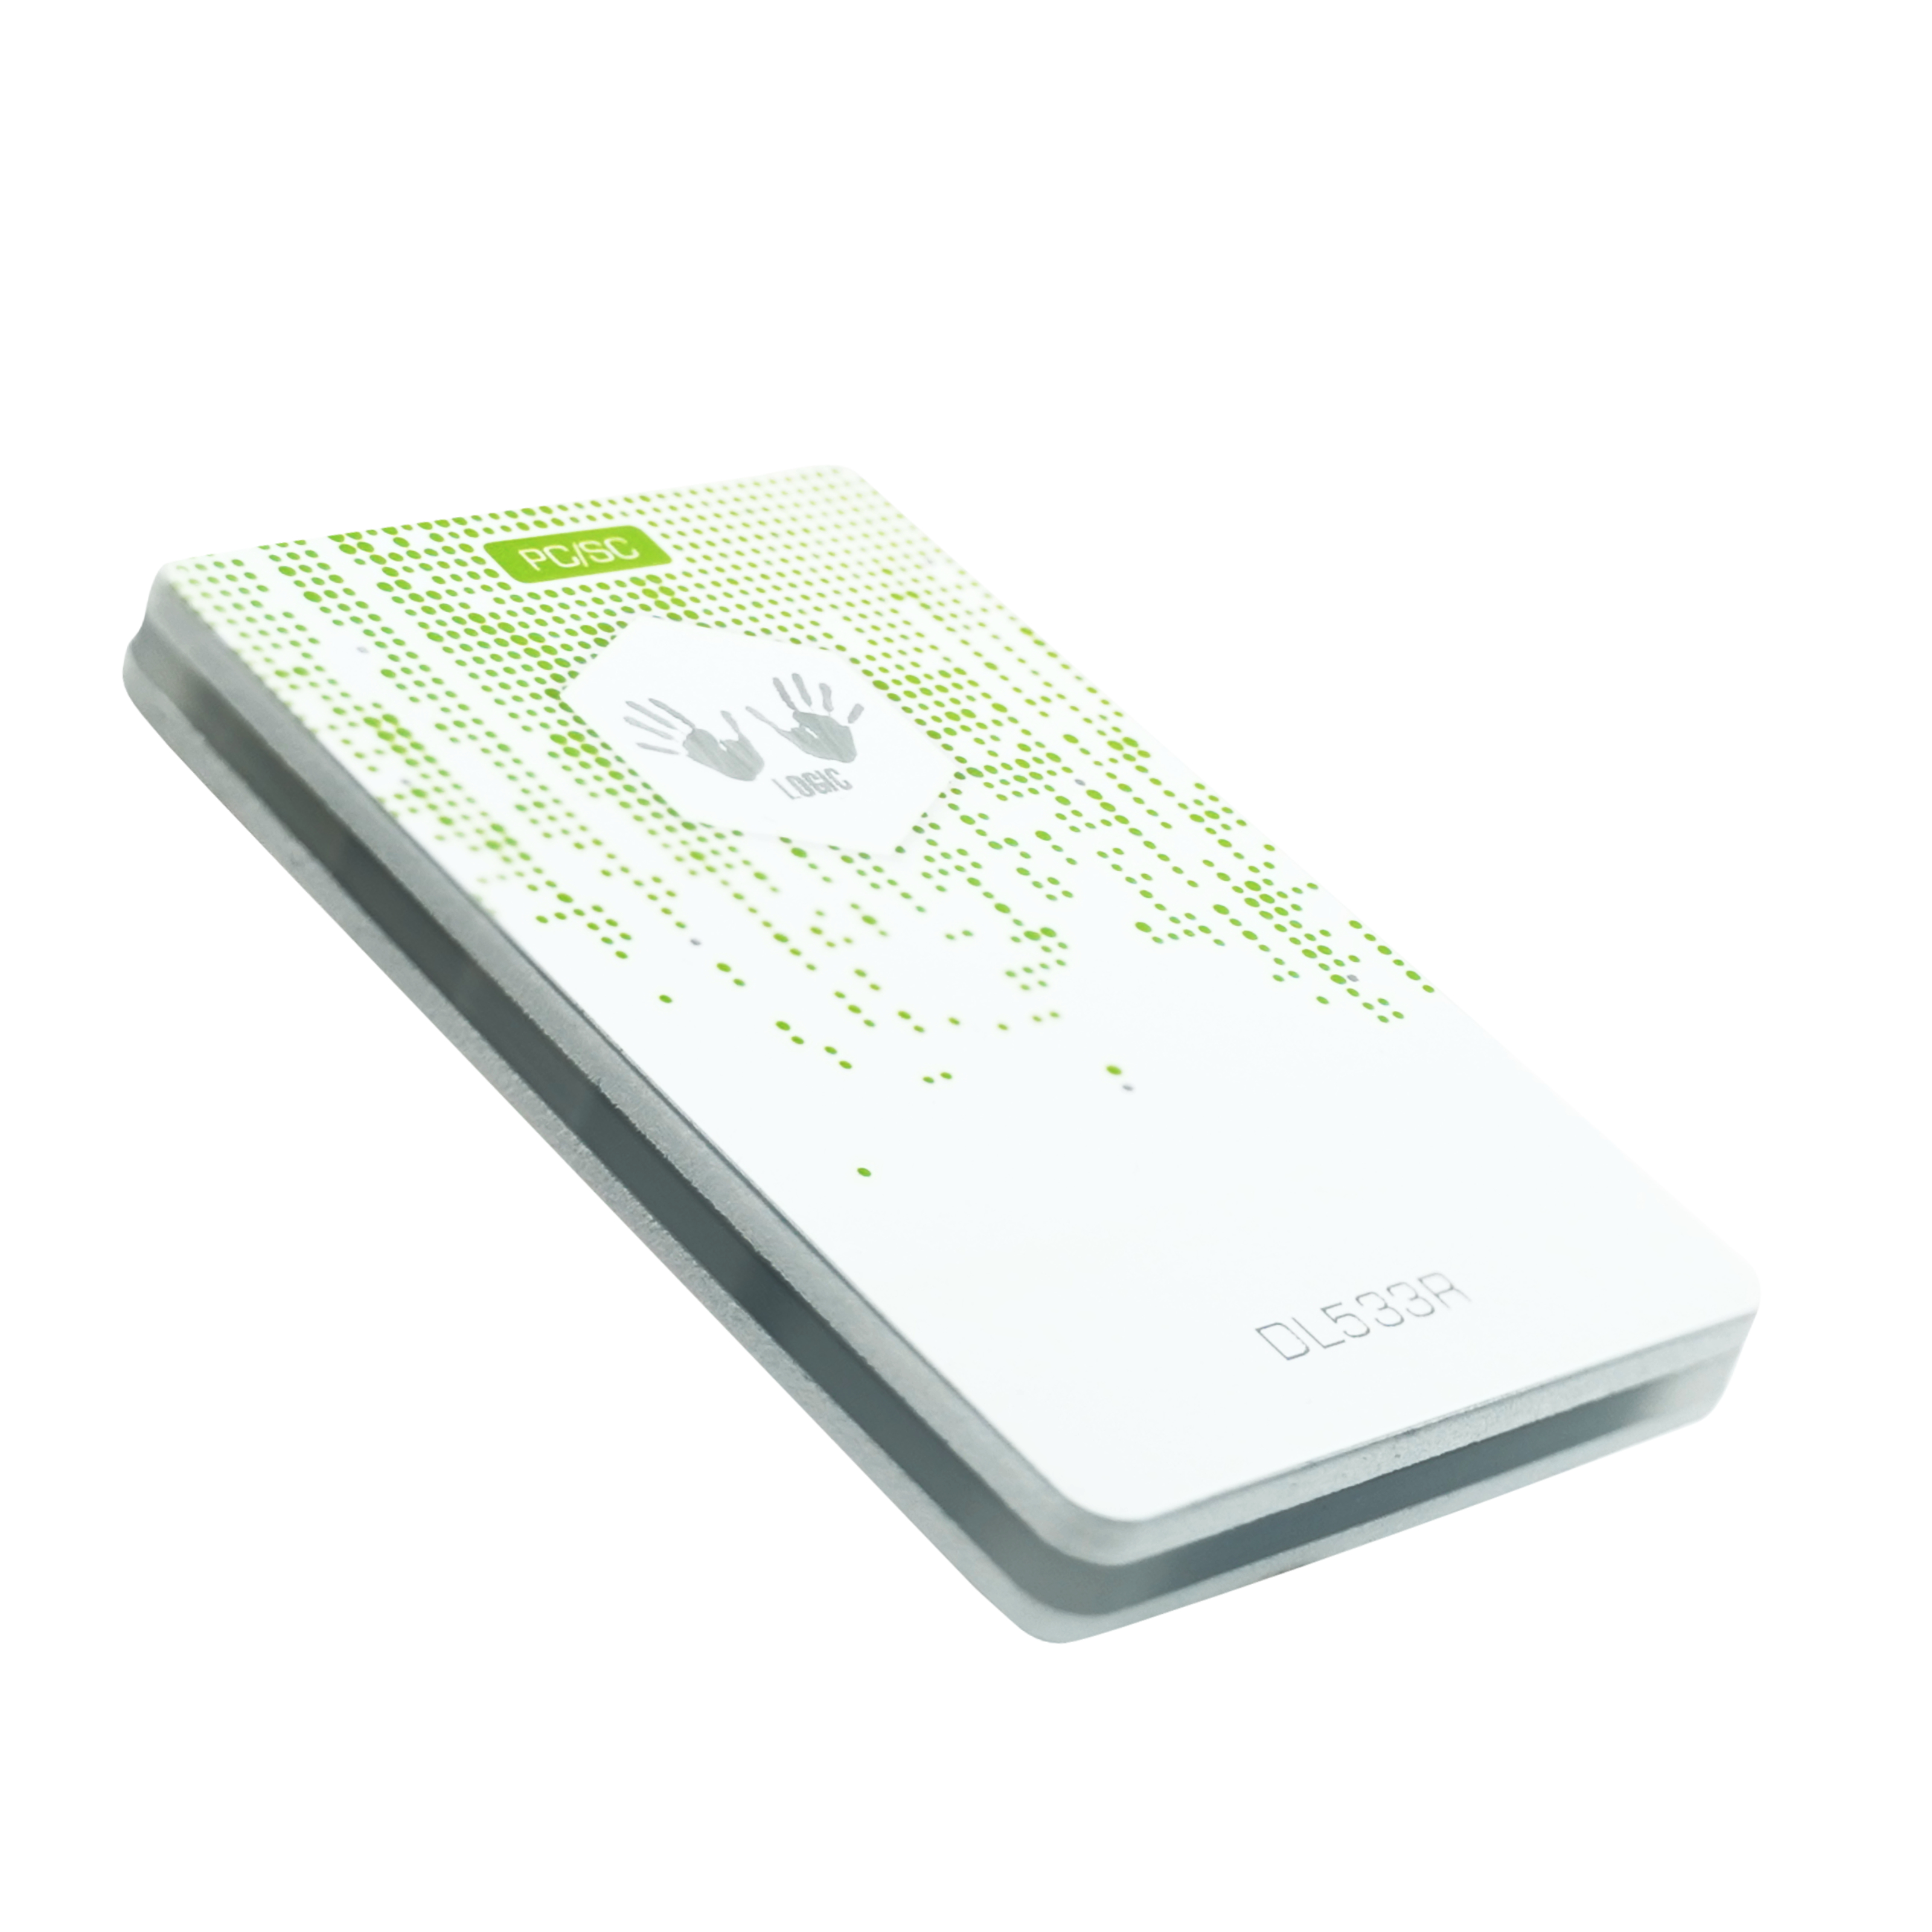 NFC Reader / Writer DL533R - 85 x 55 x 8,30 mm - white / green - with range booster function